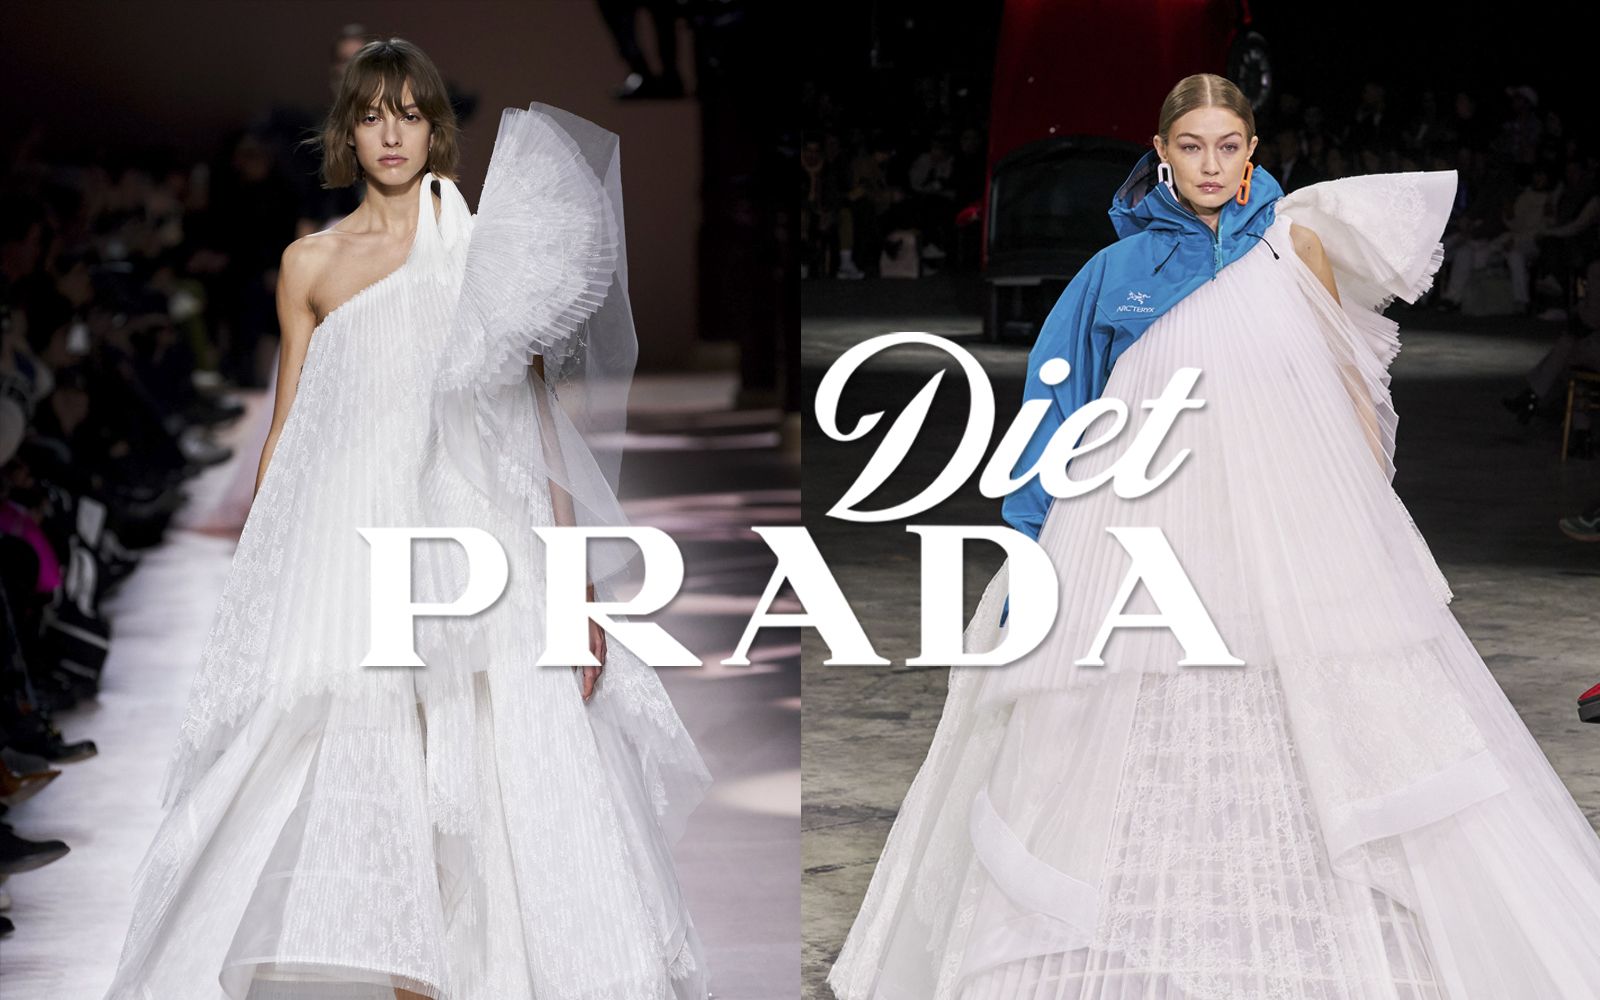 Diet Prada ™ on Instagram: Well this is an exciting rumor! Will